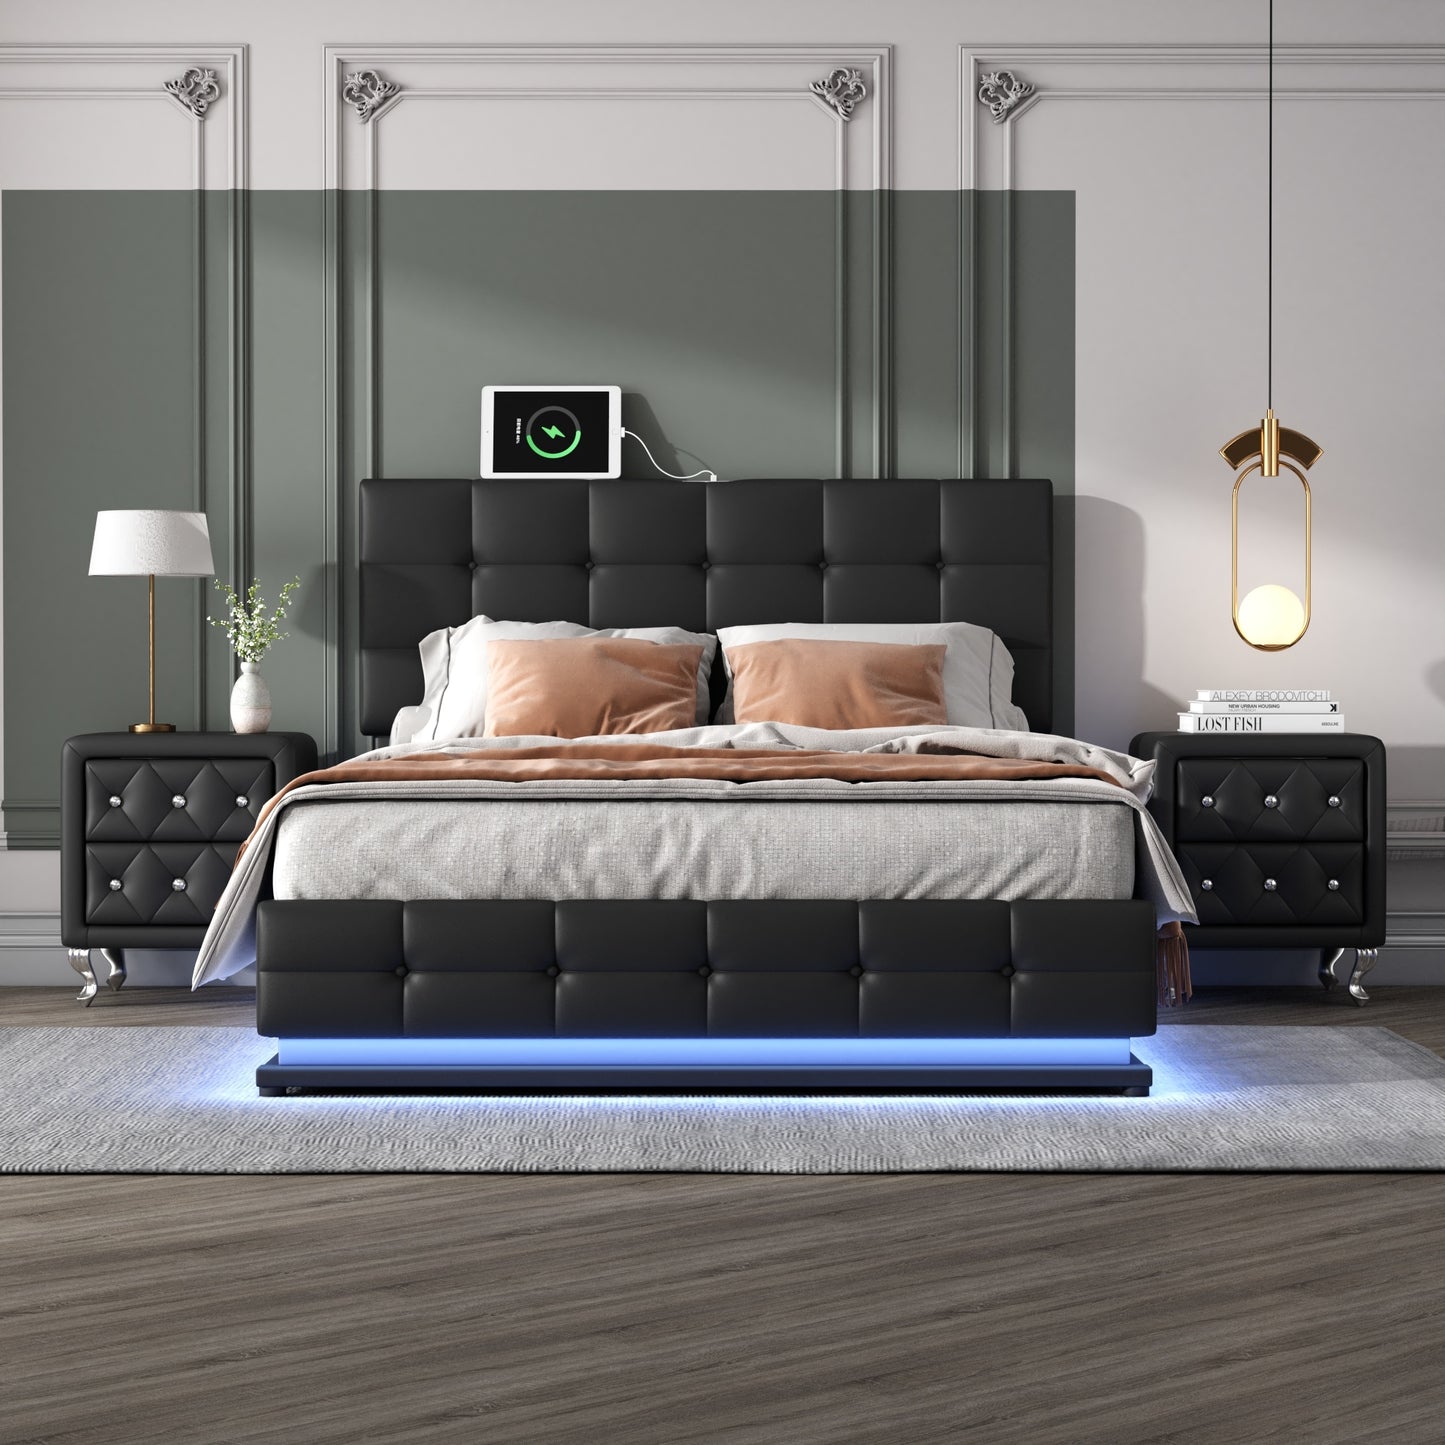 3-pieces upholstered bedroom sets with led lights ,hydraulic storage system, and usb charging station